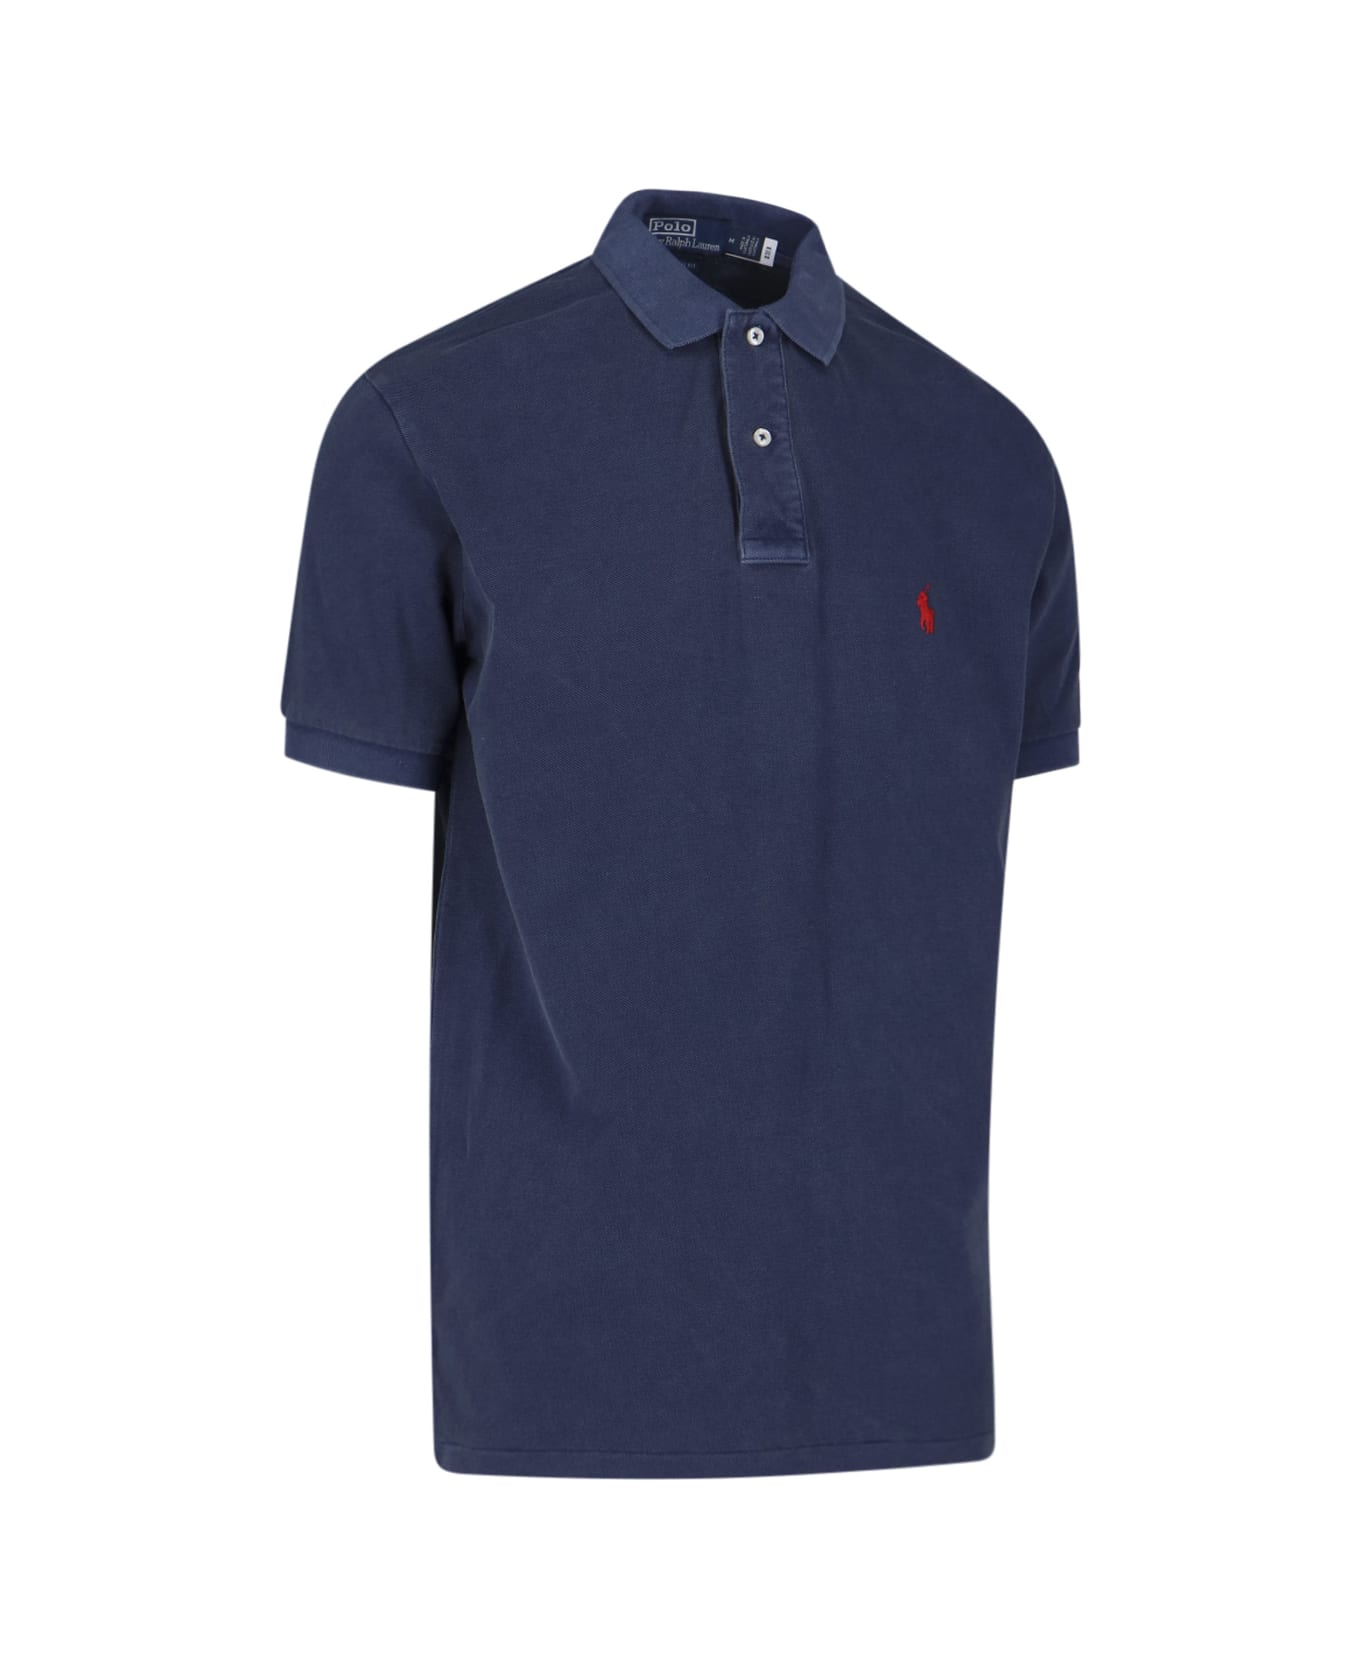 Polo Ralph Lauren Embroidered Logo Polo Shirt - Blue ポロシャツ